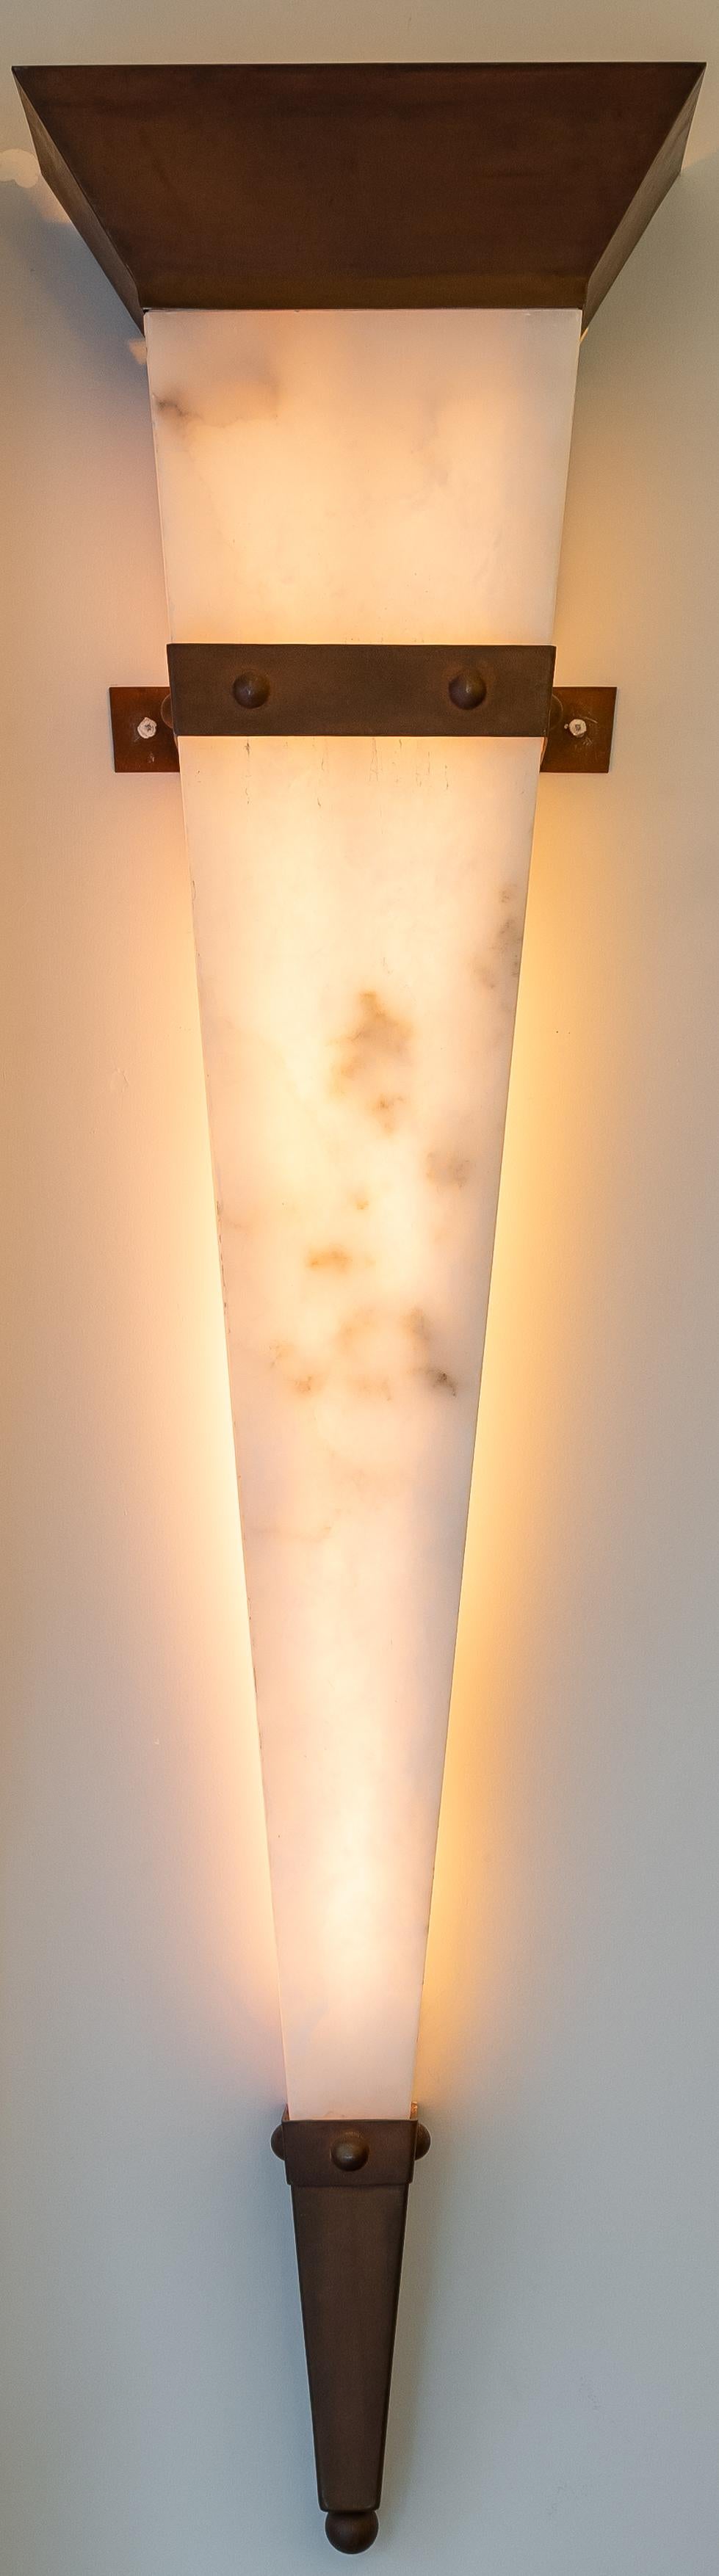 Christian Caudron, Large Contemporary Sconce, Alabaster, Fixings in Corten Steel For Sale 5